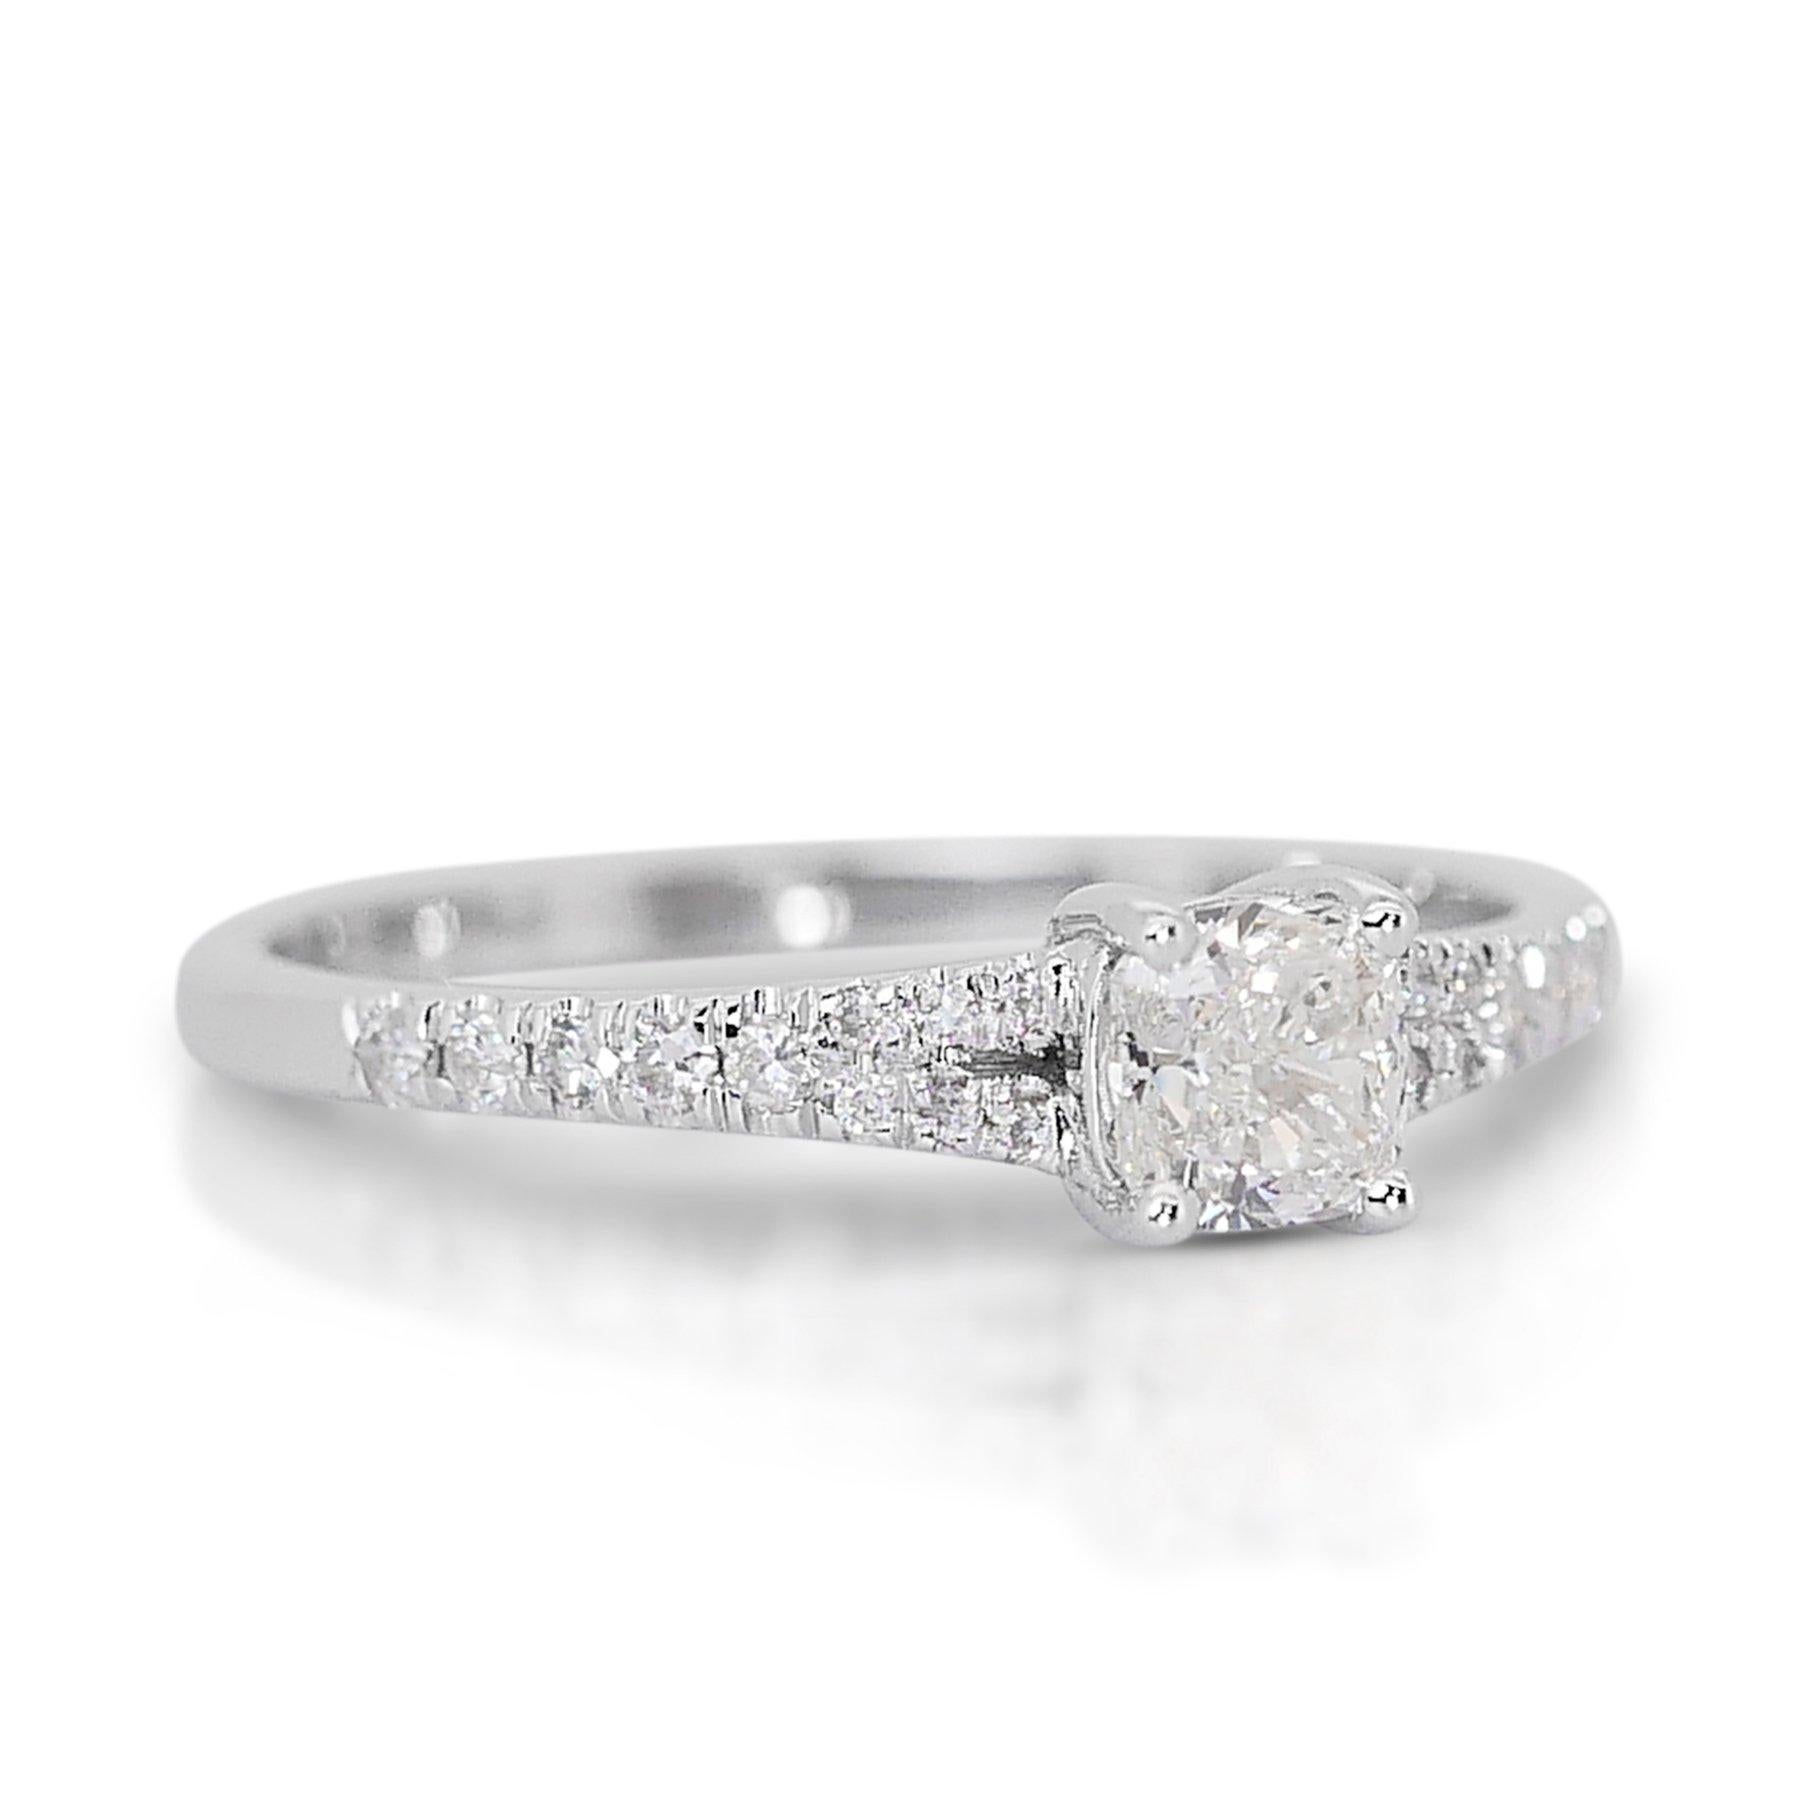 Mesmerizing 1.17ct Diamond Pave Ring in 18k White Gold - GIA Certified In New Condition For Sale In רמת גן, IL